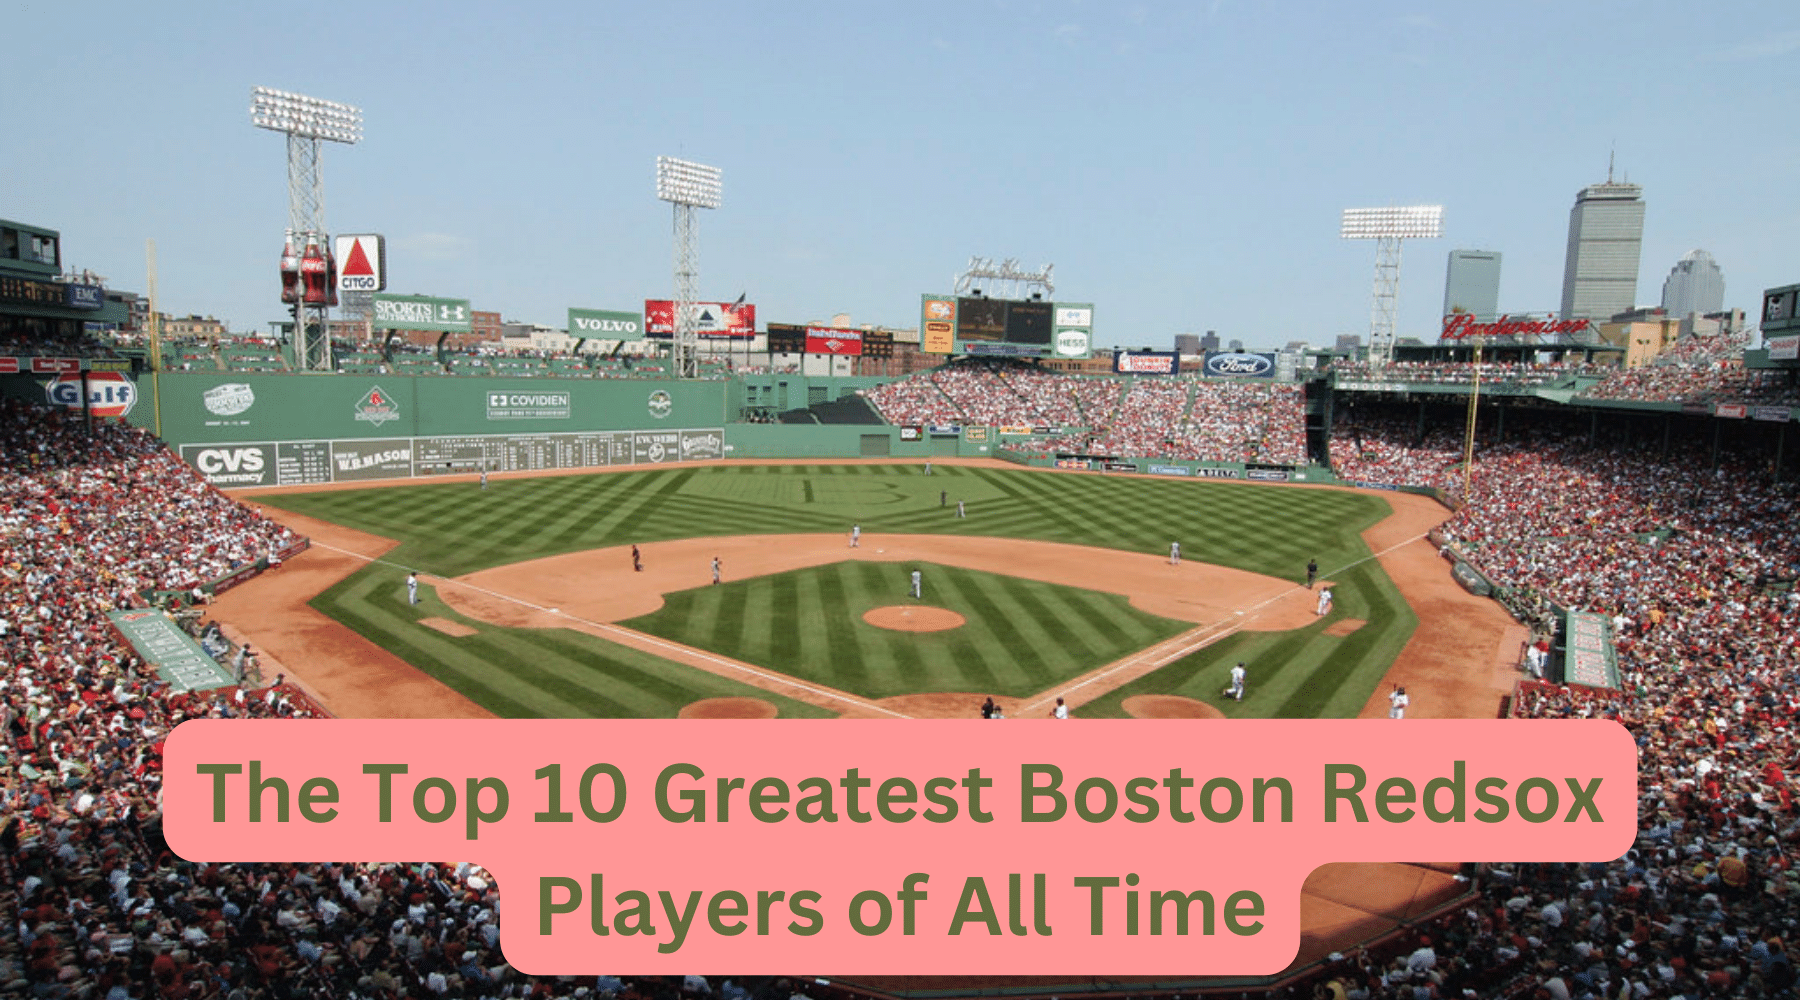 The Top 10 Greatest Boston Red Sox Players of All Time